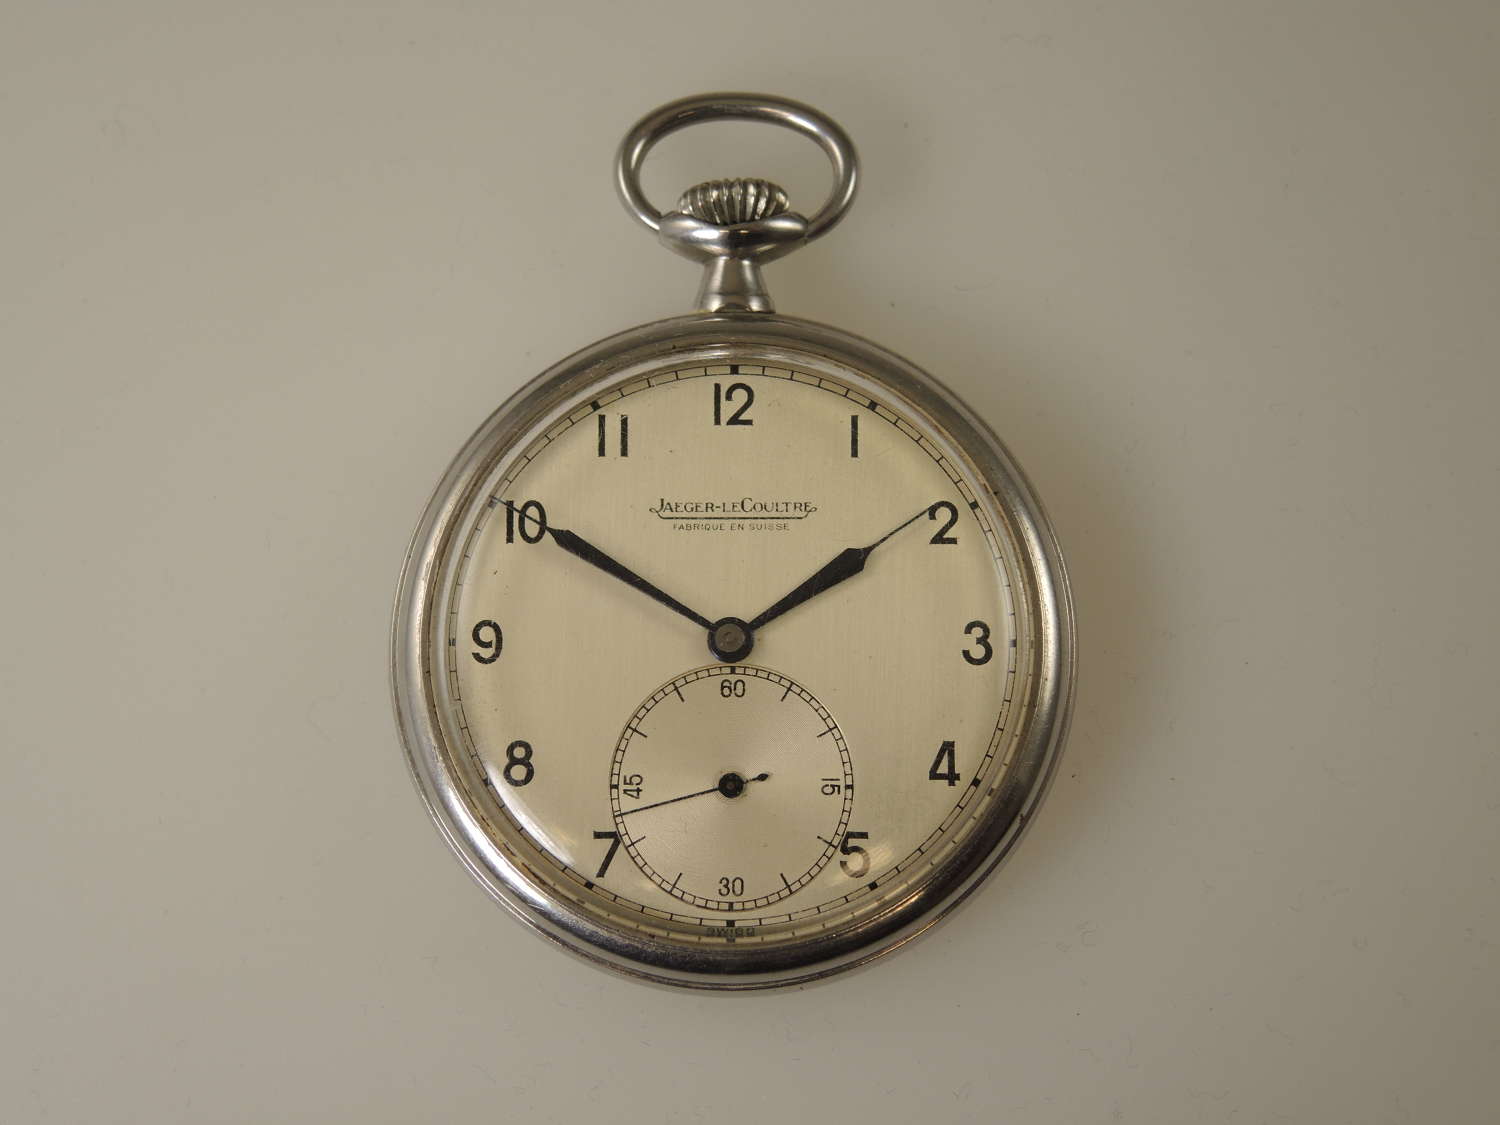 Stylish Jaeger-Le-Coultre pocket watch c1940